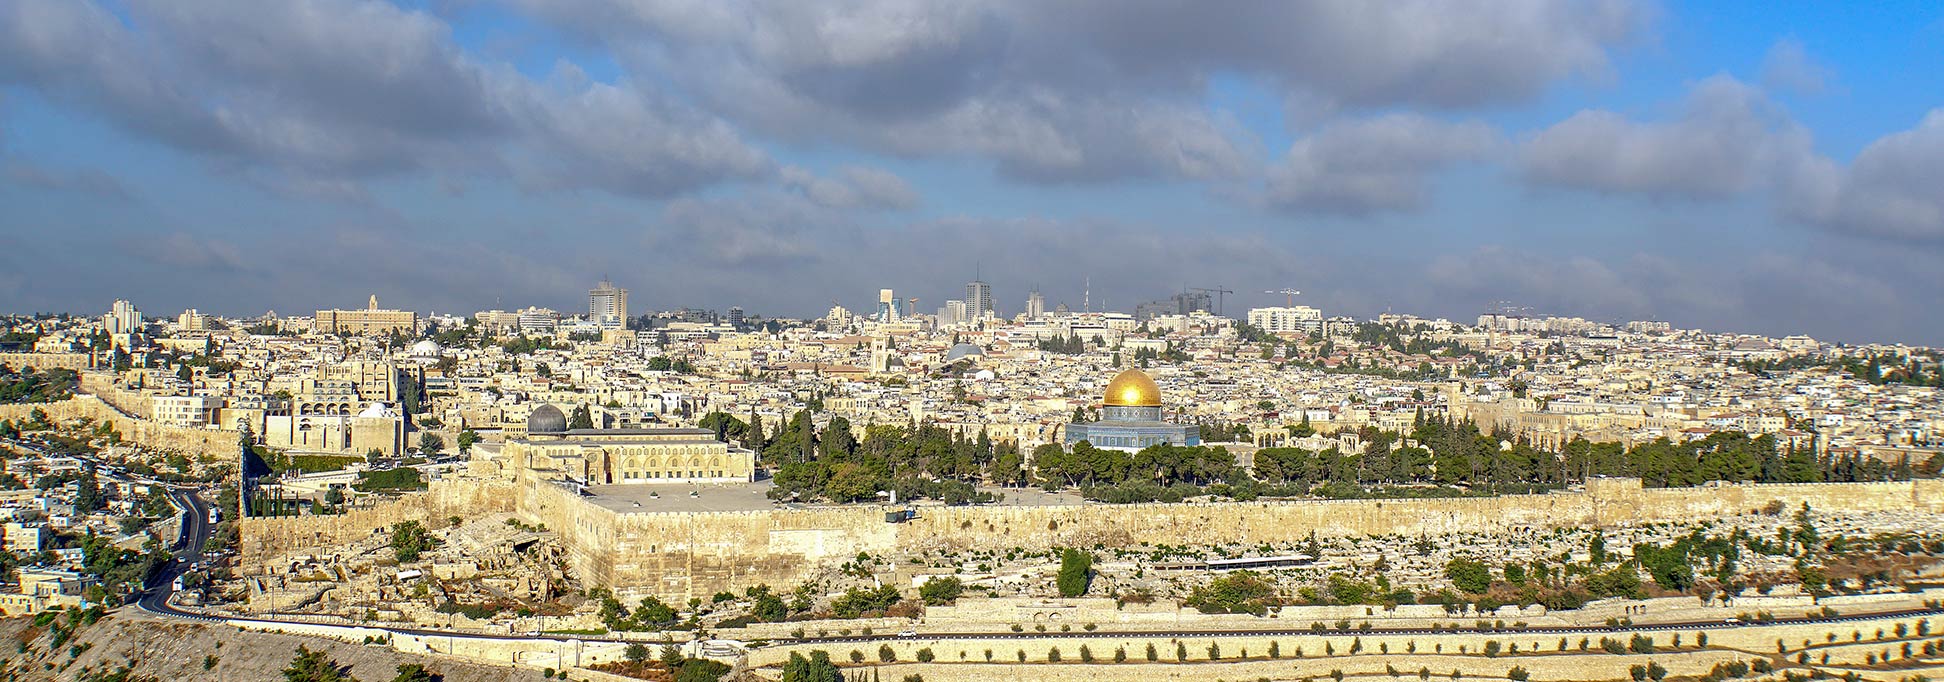 Panorama of the Old City of Jerusalem with the Dome of the Rock, Israel